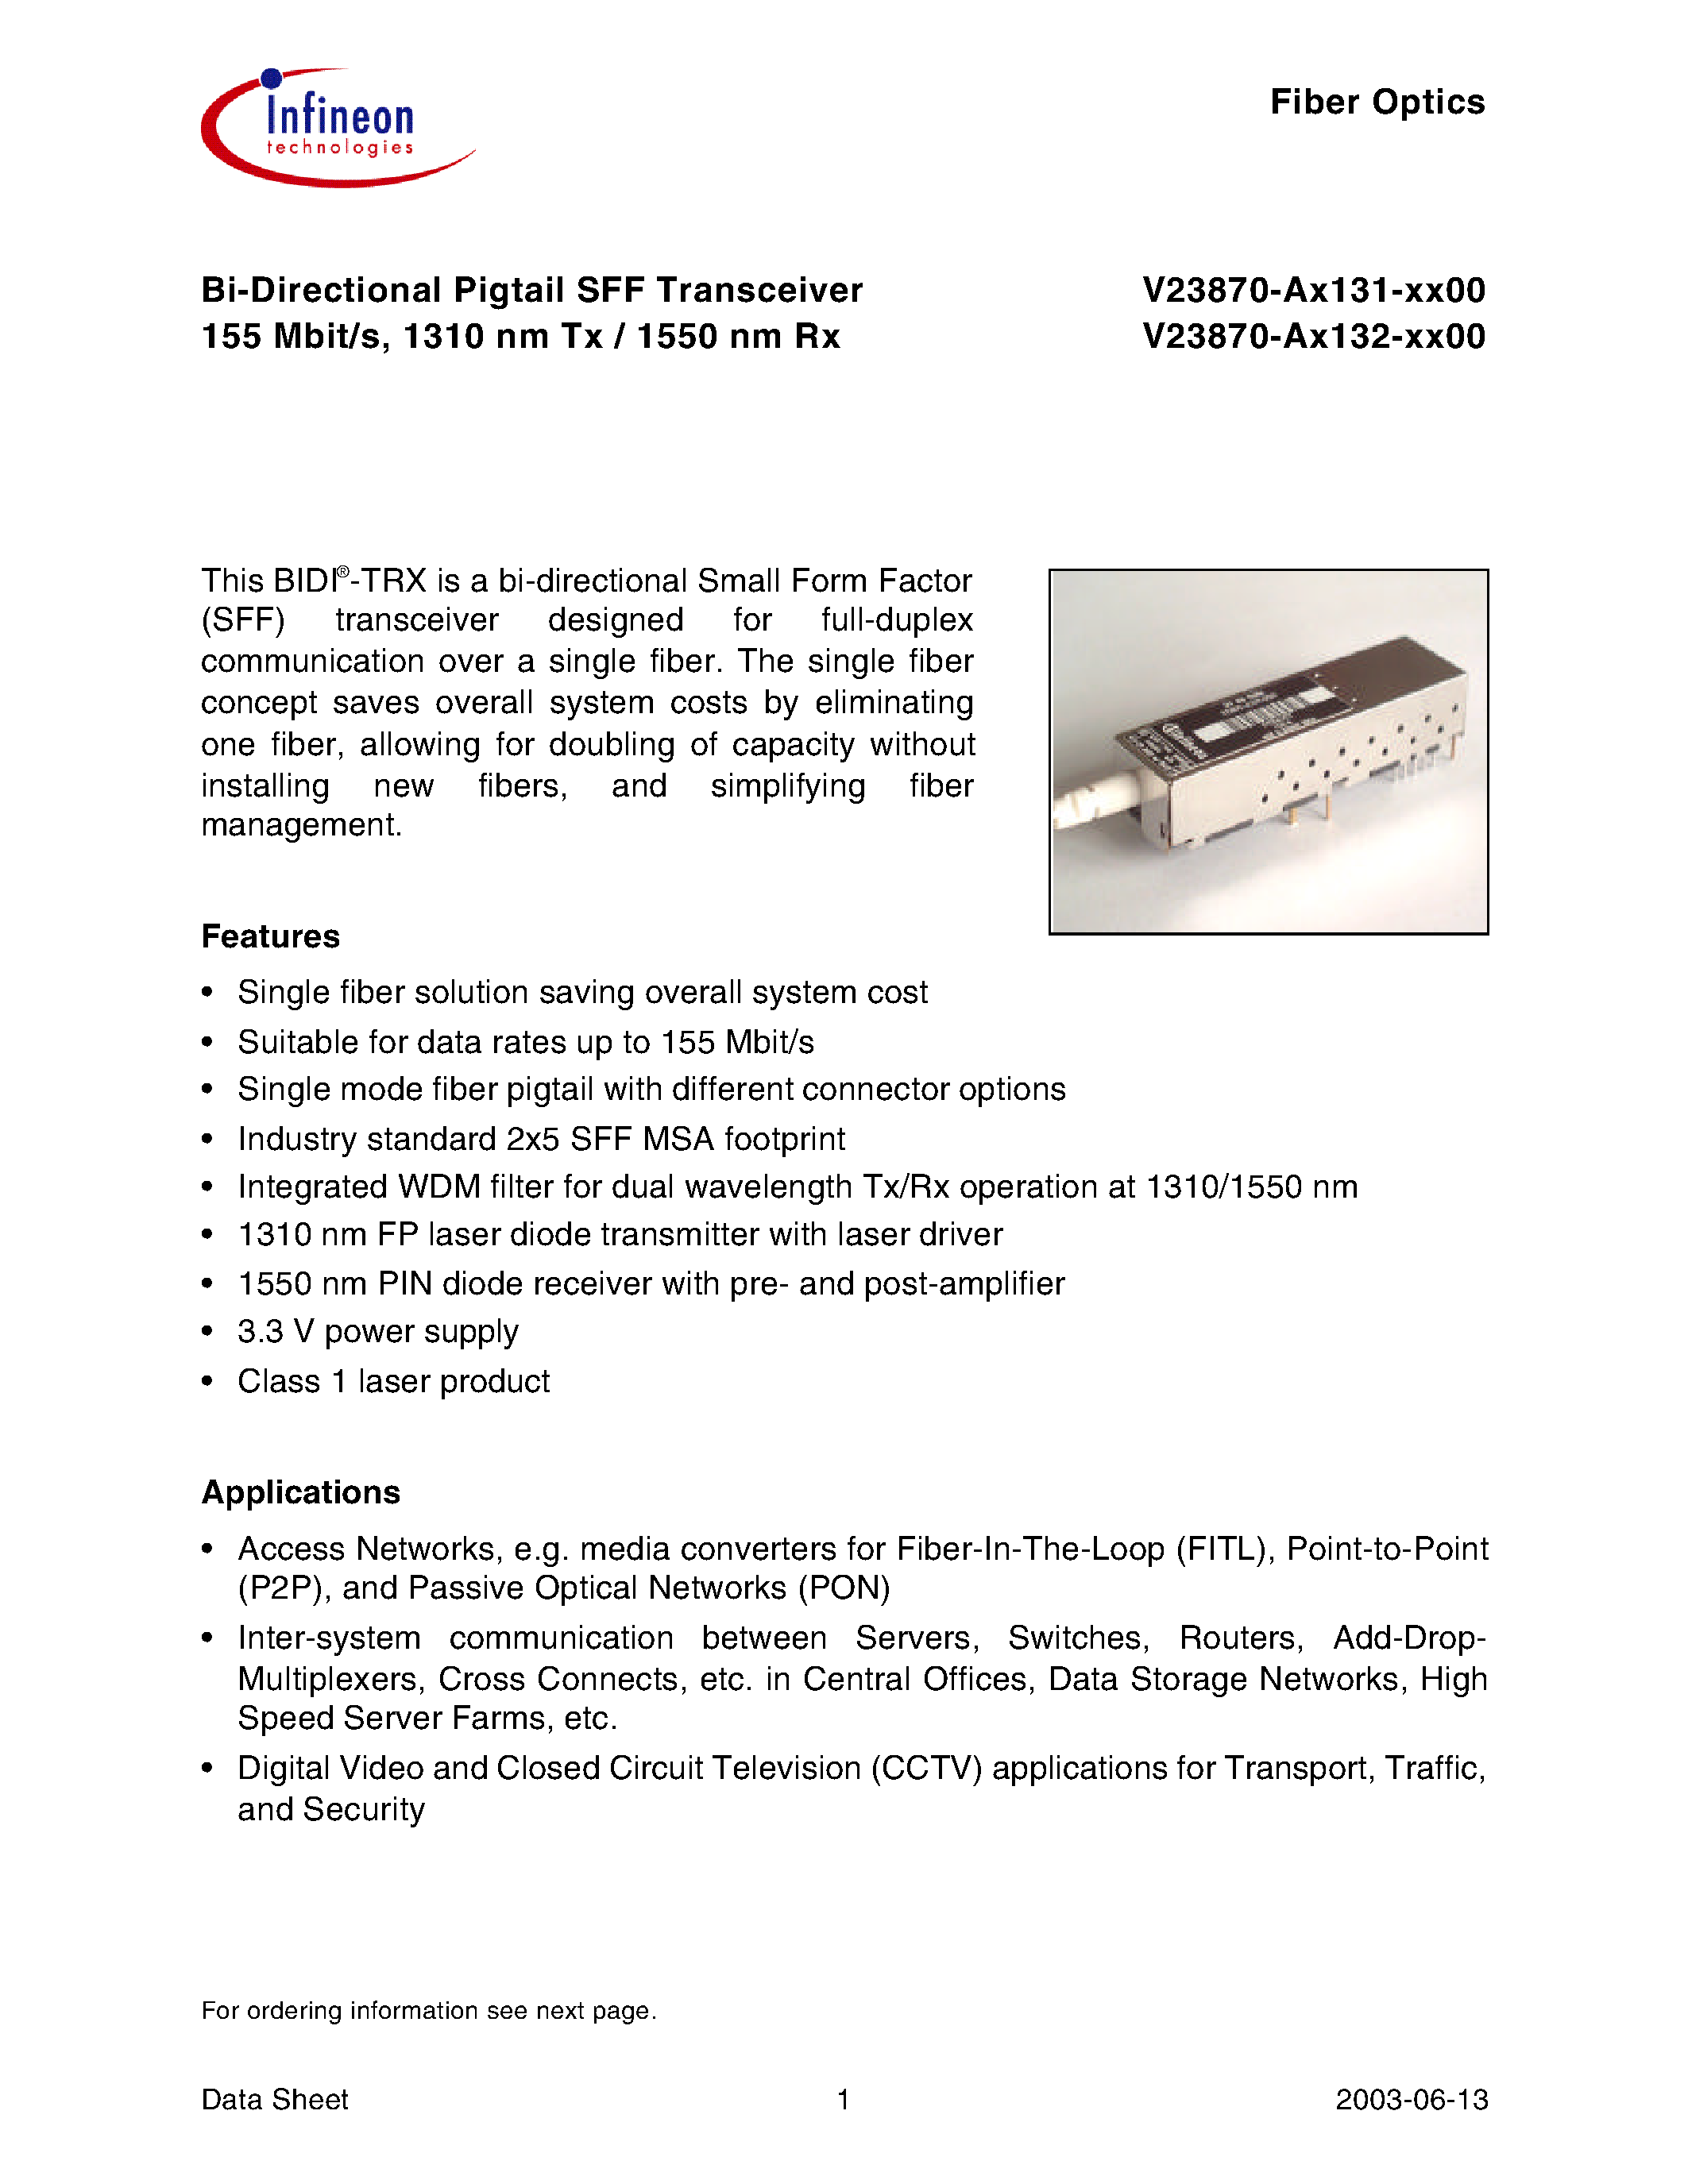 Datasheet V23870-A3131-C200 - Bi-Directional Pigtail SFF Transceiver 155 Mbit/s/ 1310 nm Tx / 1550 nm Rx page 1